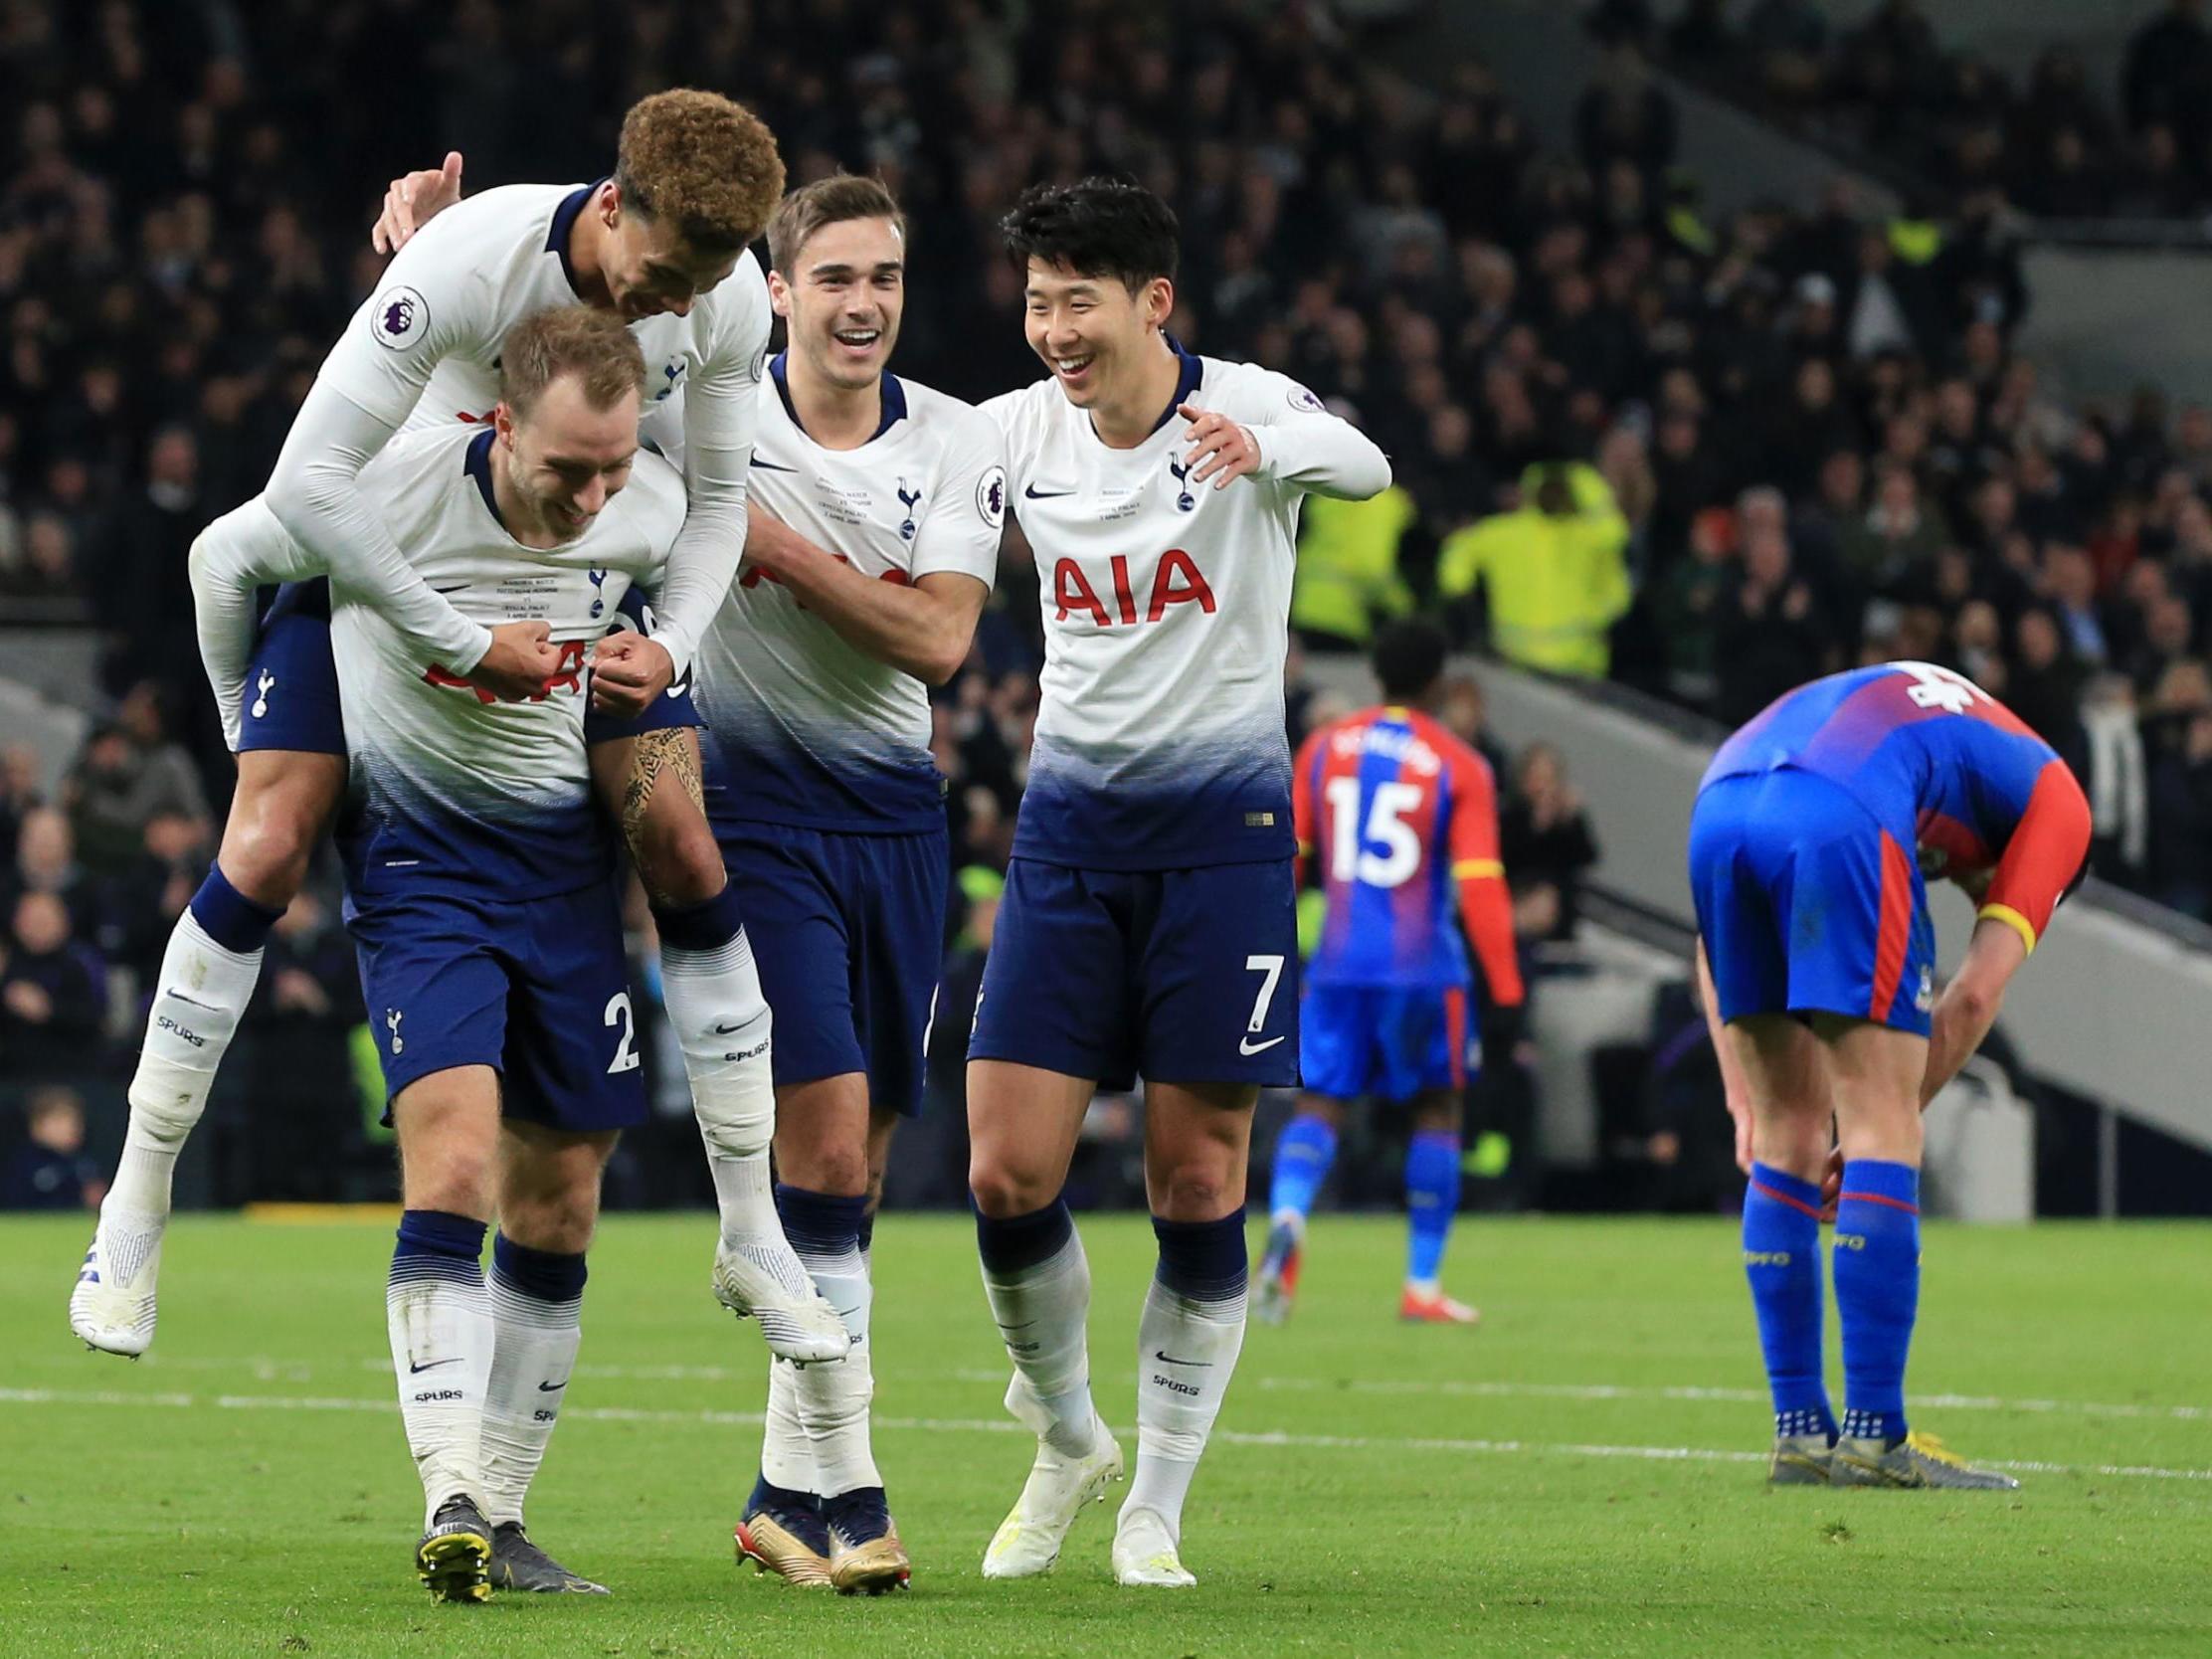 Tottenham's win over Crystal Palace was more than a return to White Hart Lane, it was a return to form with a far bigger prize on offer